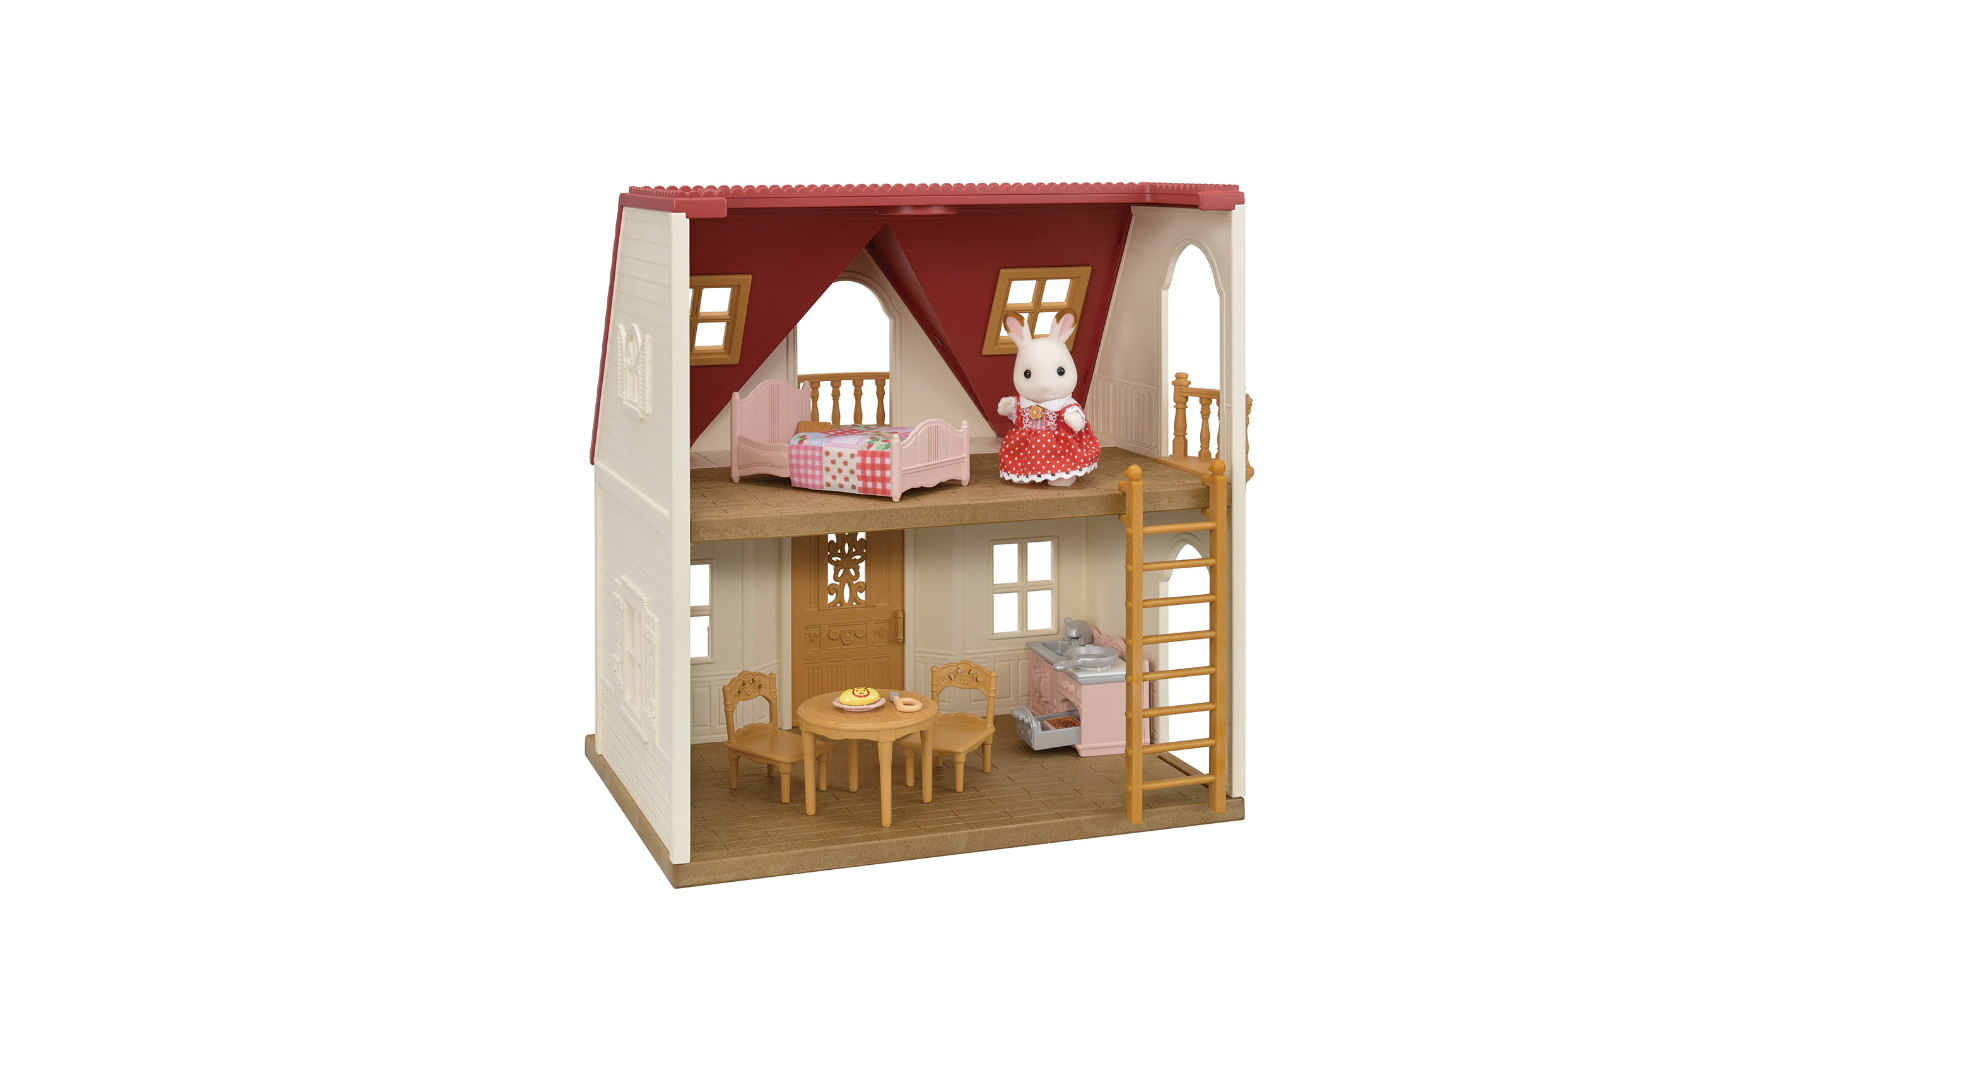 The Sylvanian Families country house.